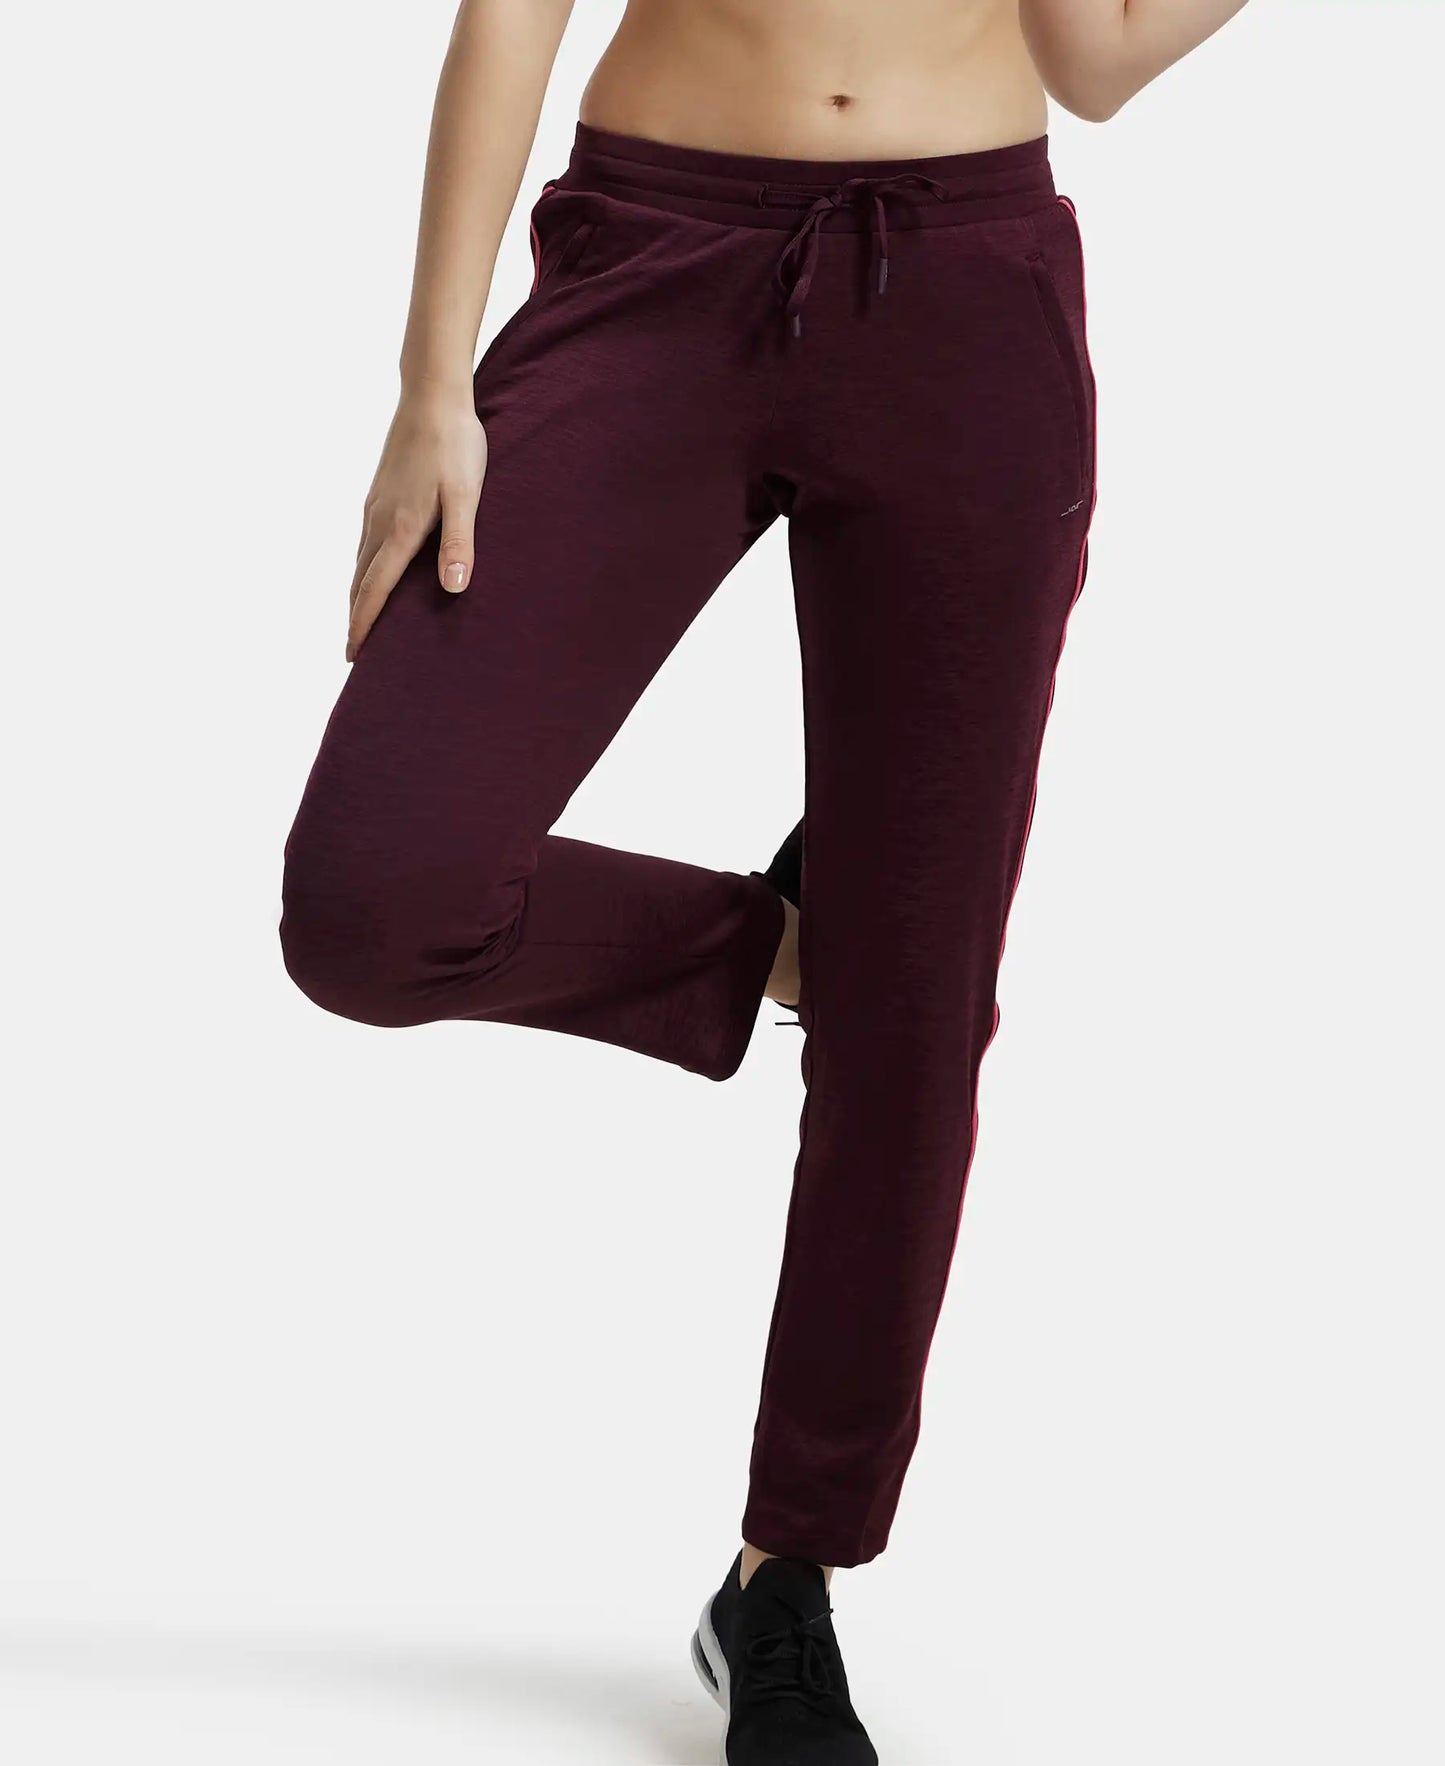 Microfiber Fabric Straight Fit Trackpants with Side Zipper Pockets - Wine Tasting-5